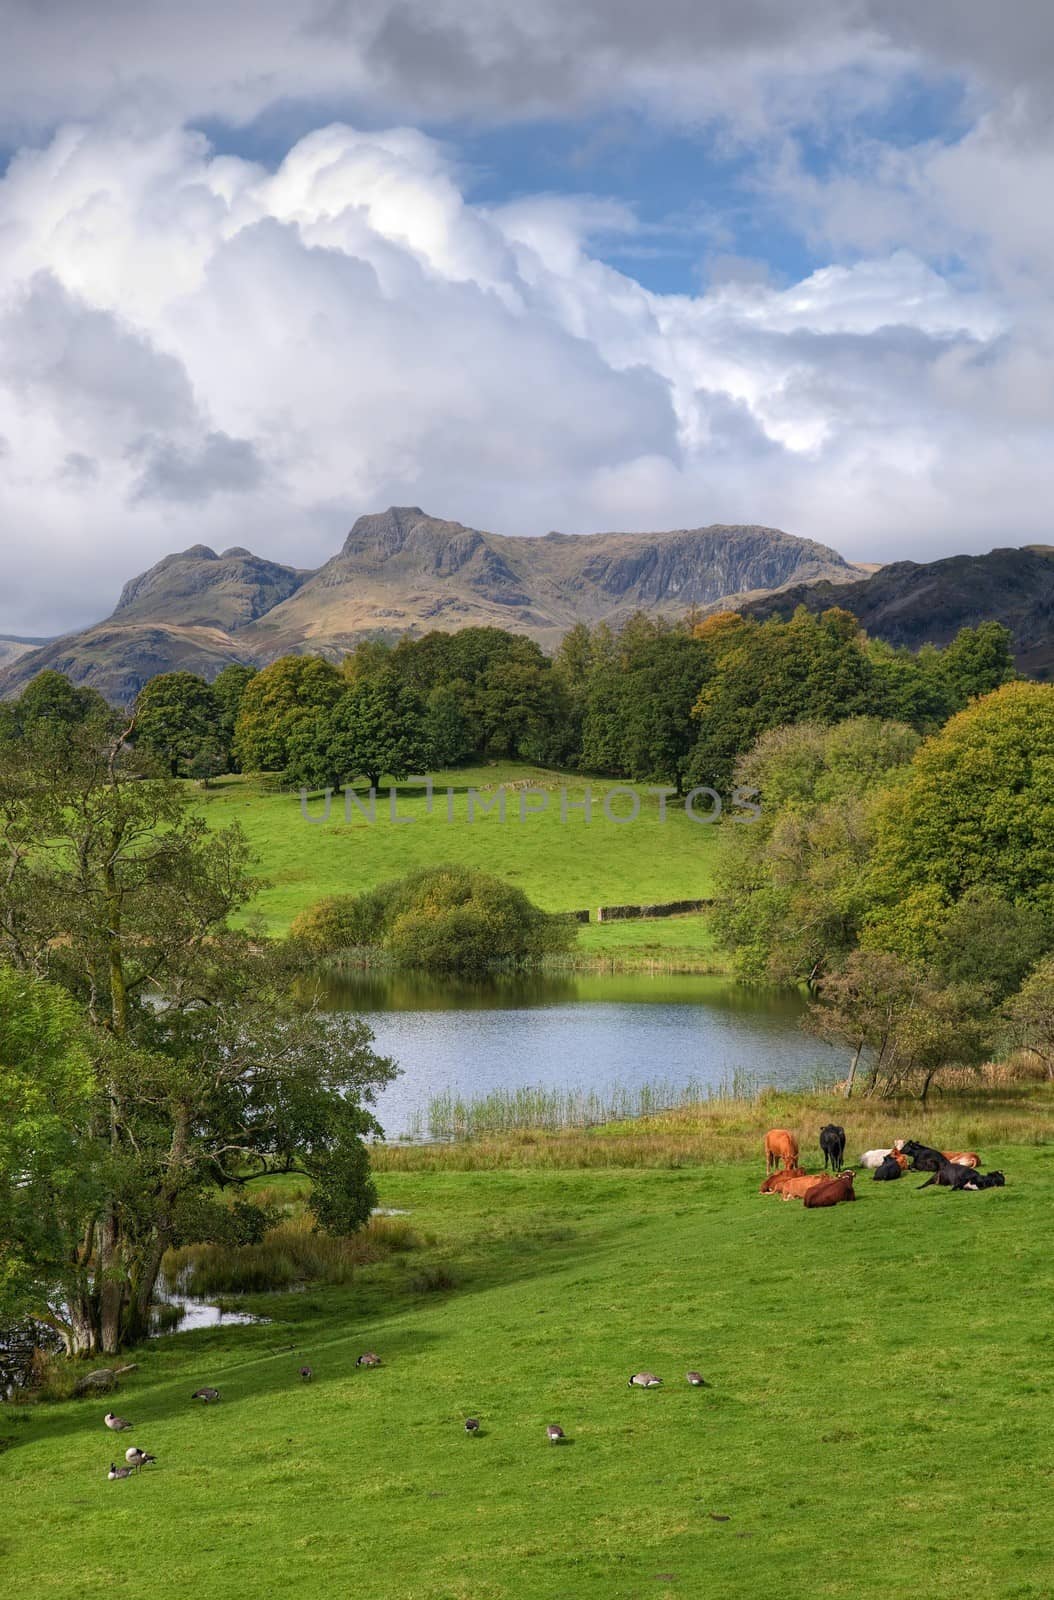 Beautiful Loughrigg Tarn with grazing cows and geese by the waters edge, Cumbria, England.